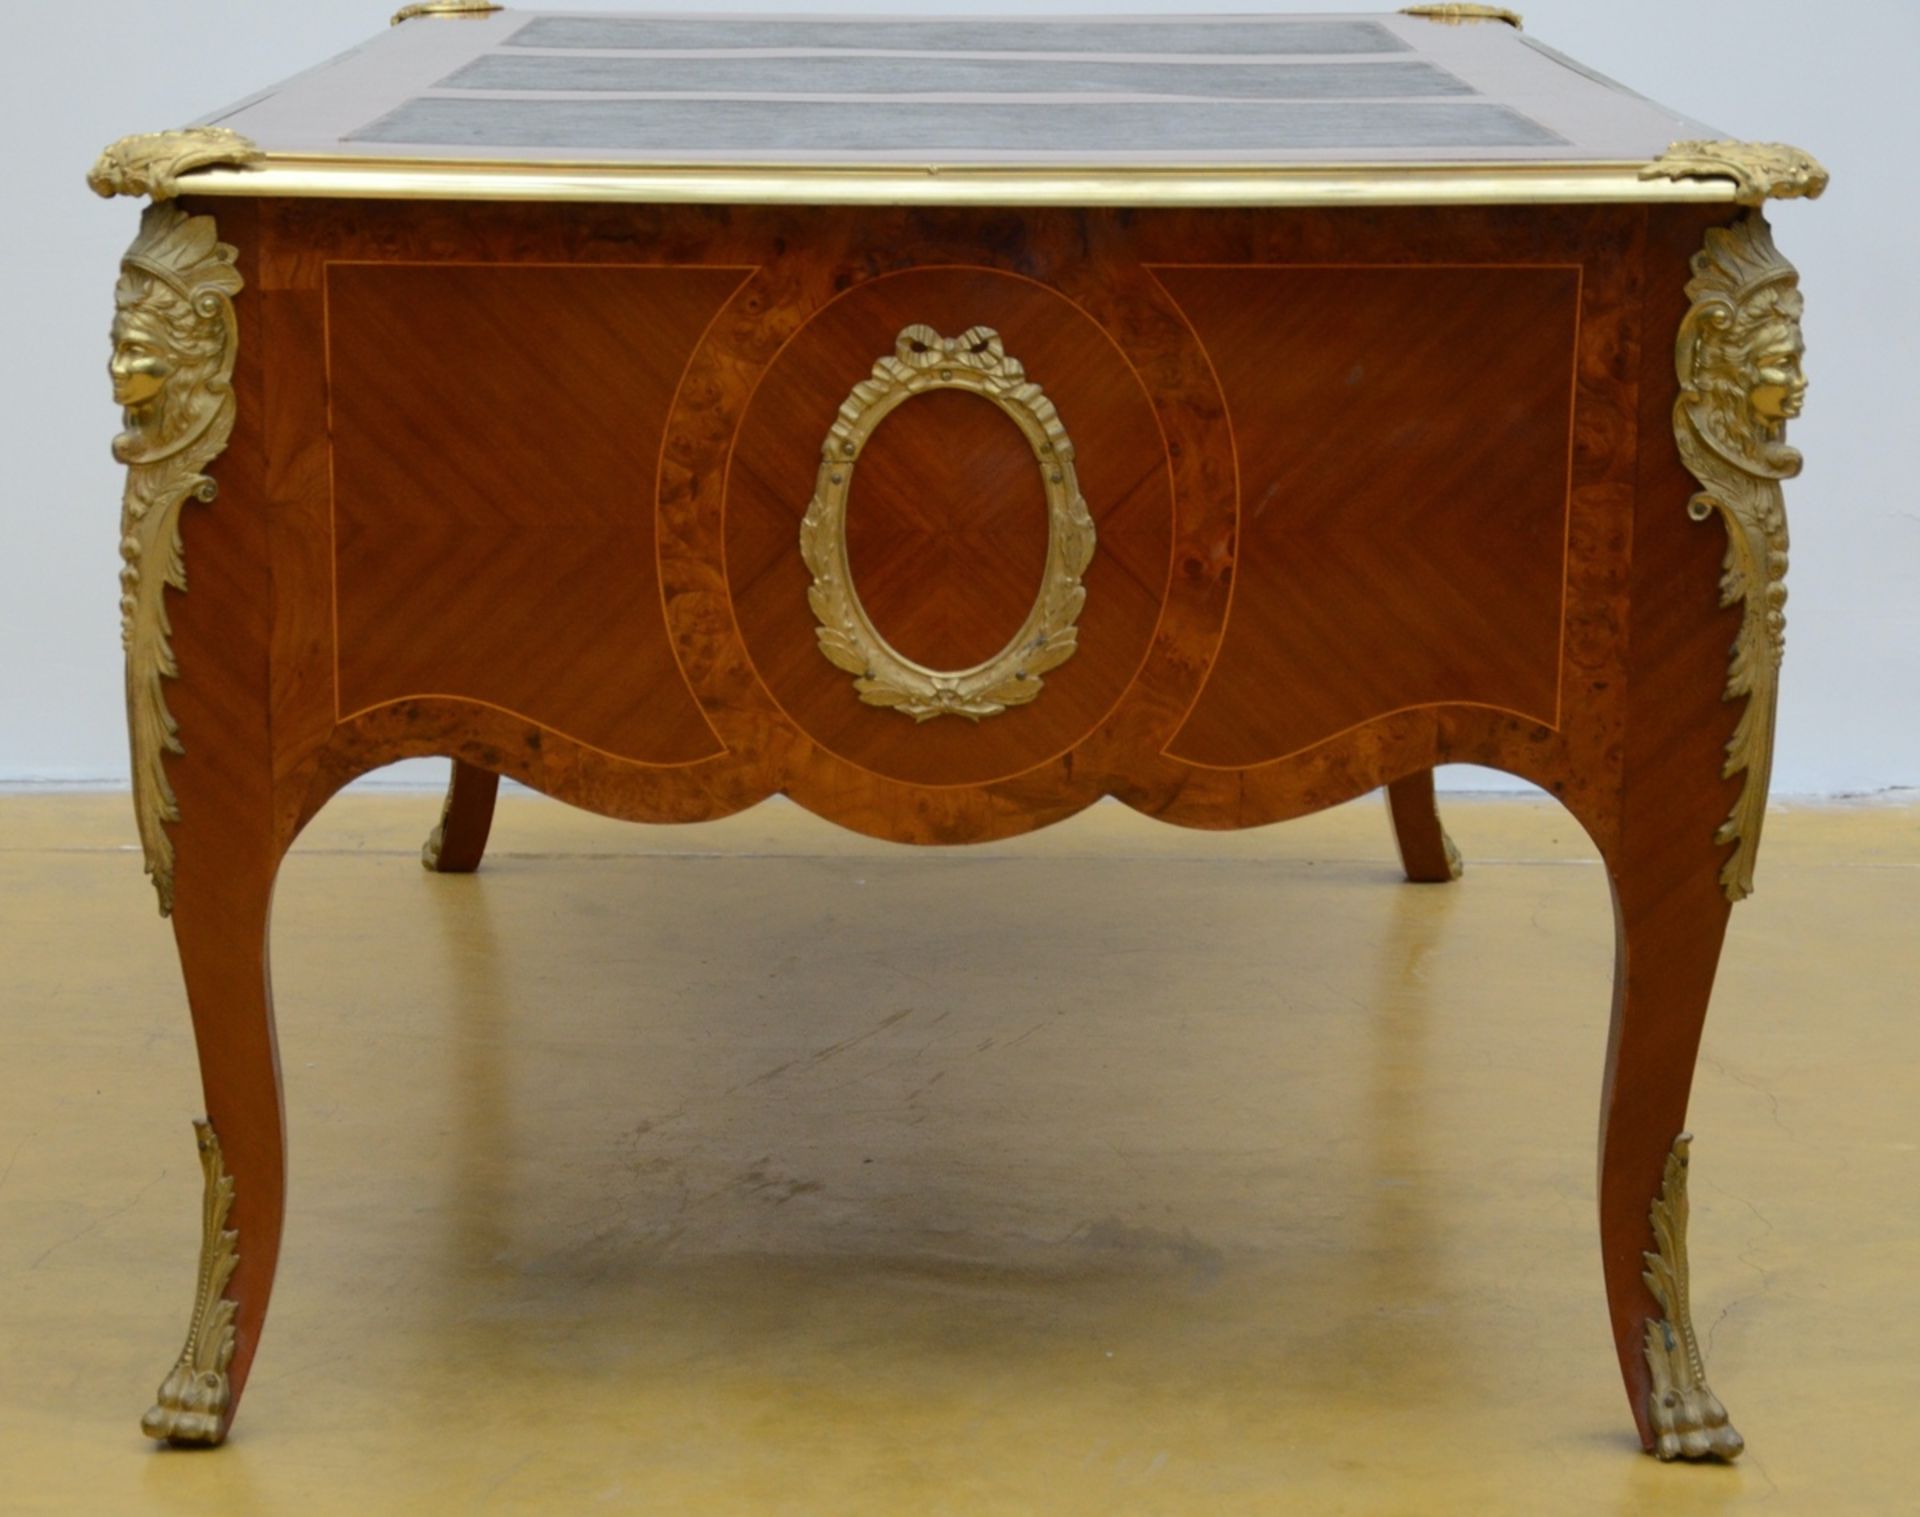 Large desk in Louis XV style (79x177x110cm) - Image 2 of 4